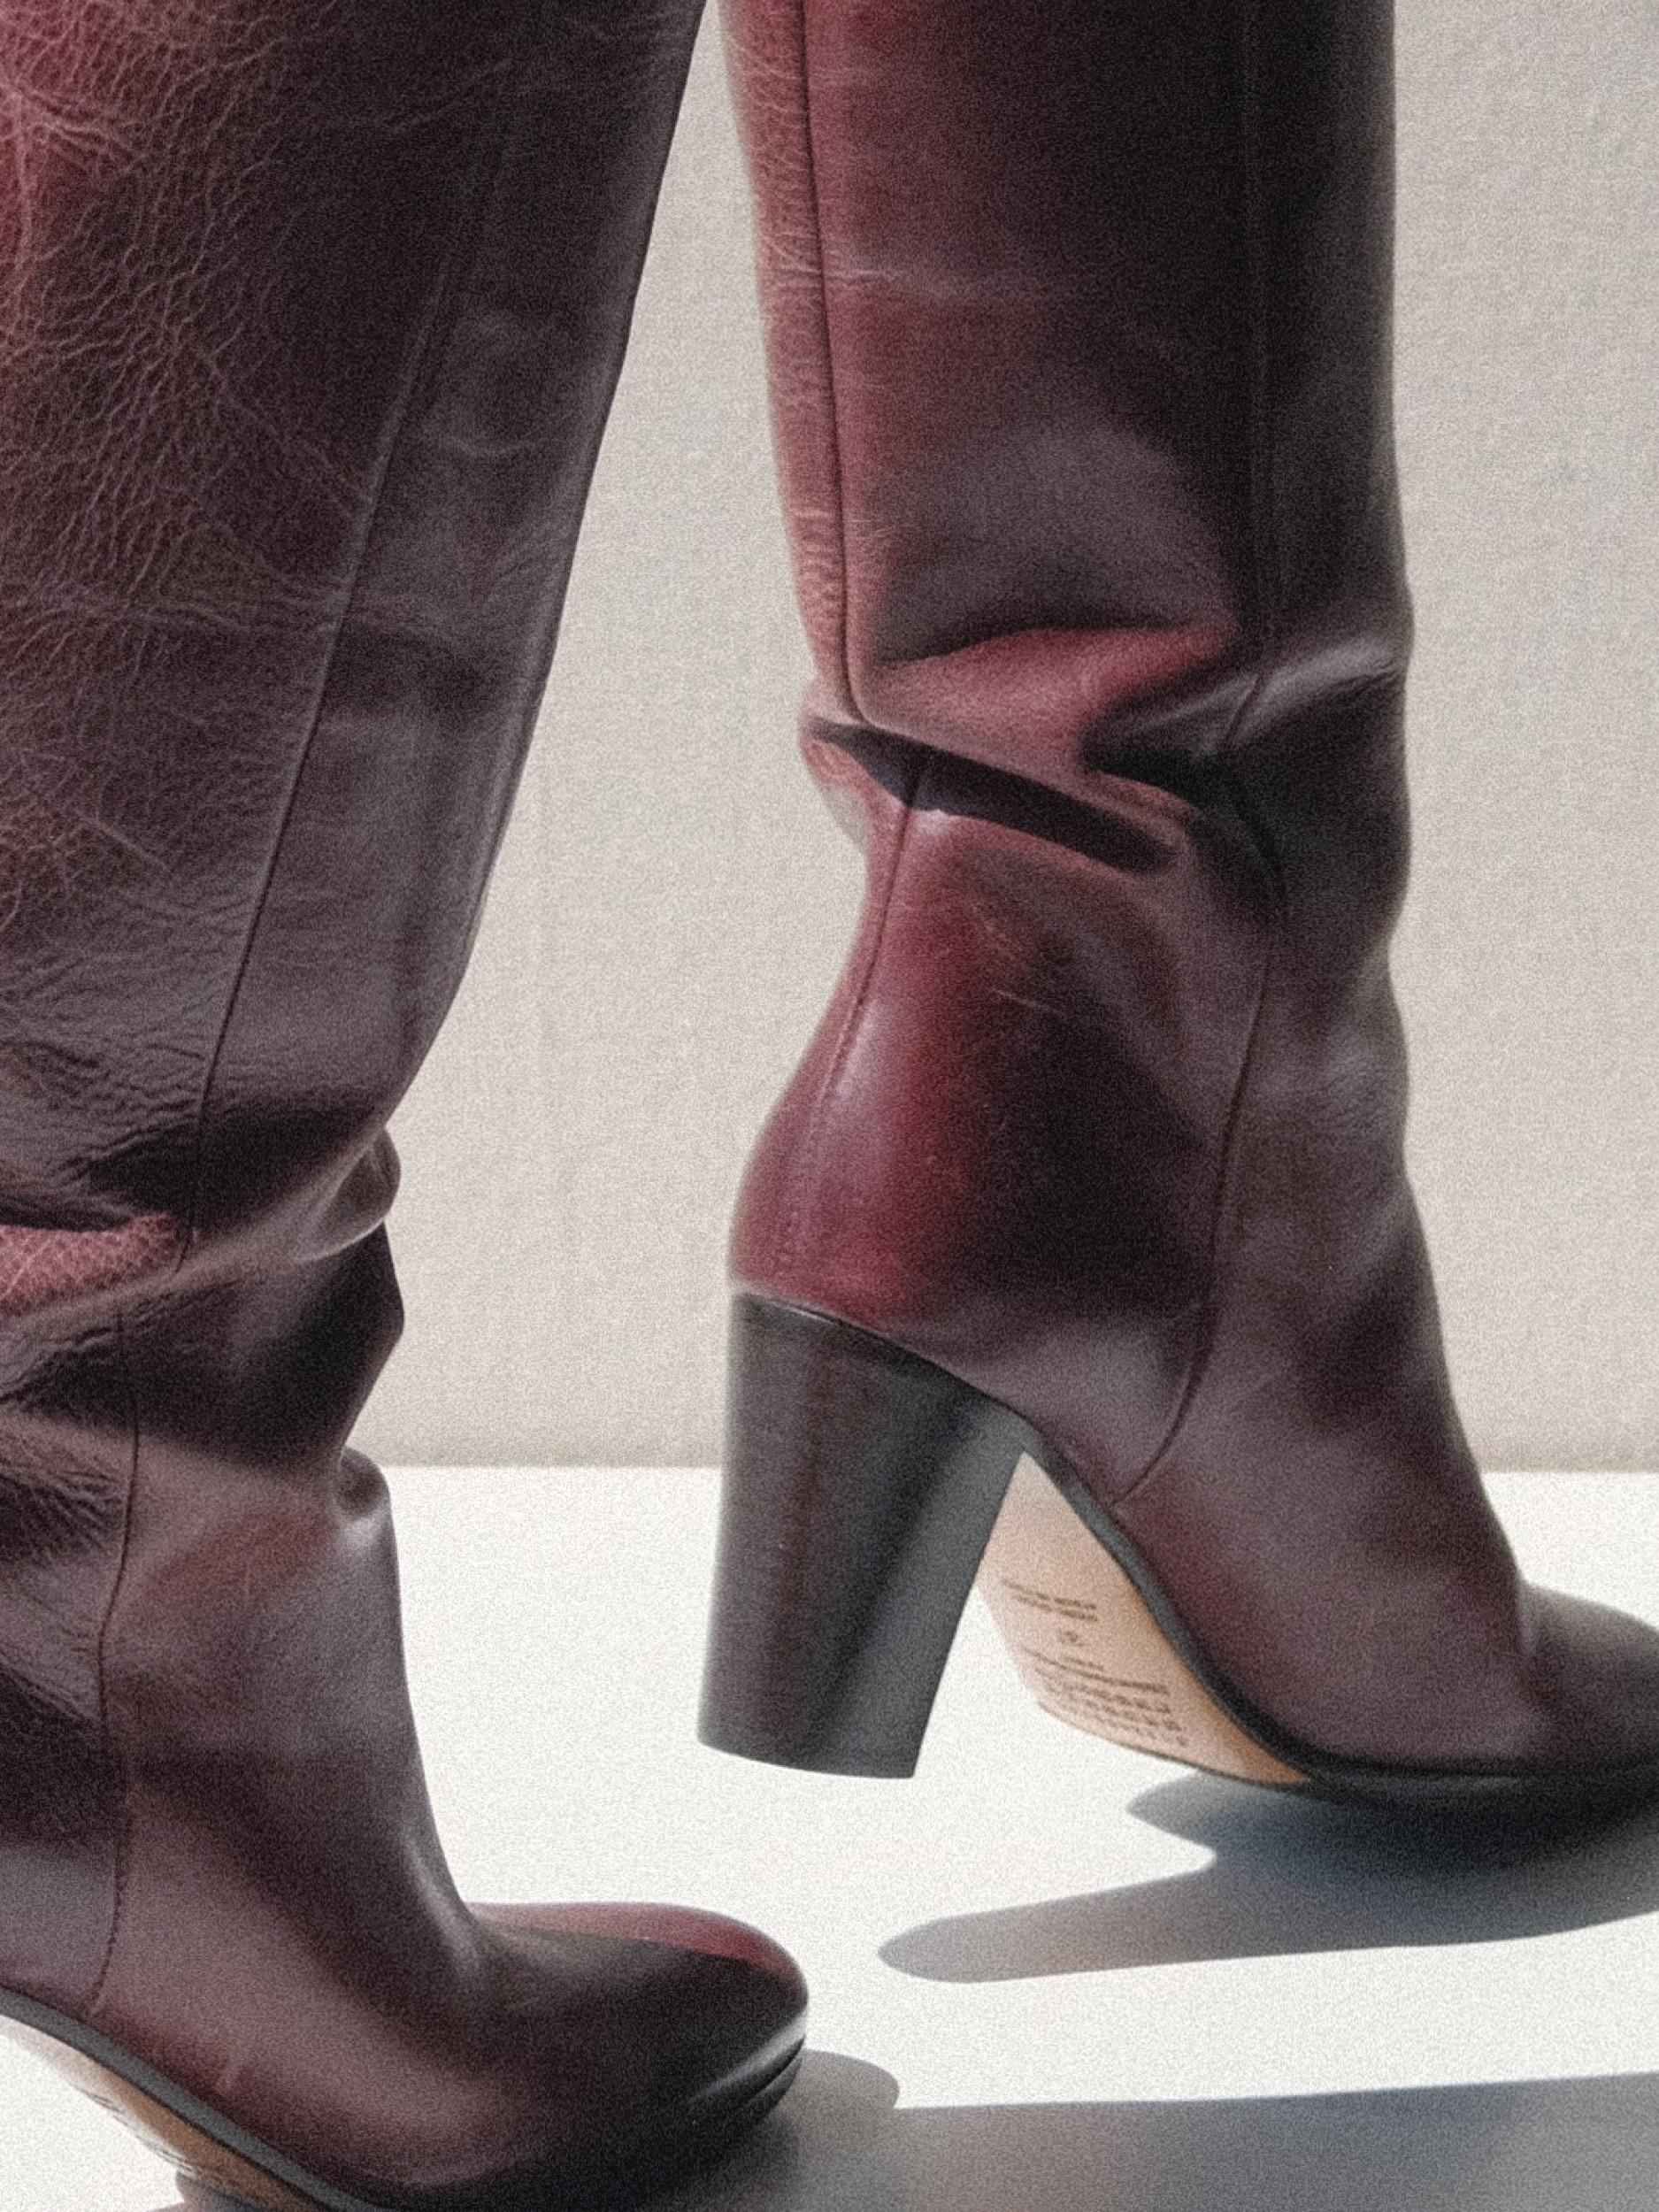 Martin Margiela Riding Boots Deep Red Size 37 Replica Line 22 For Sale 7